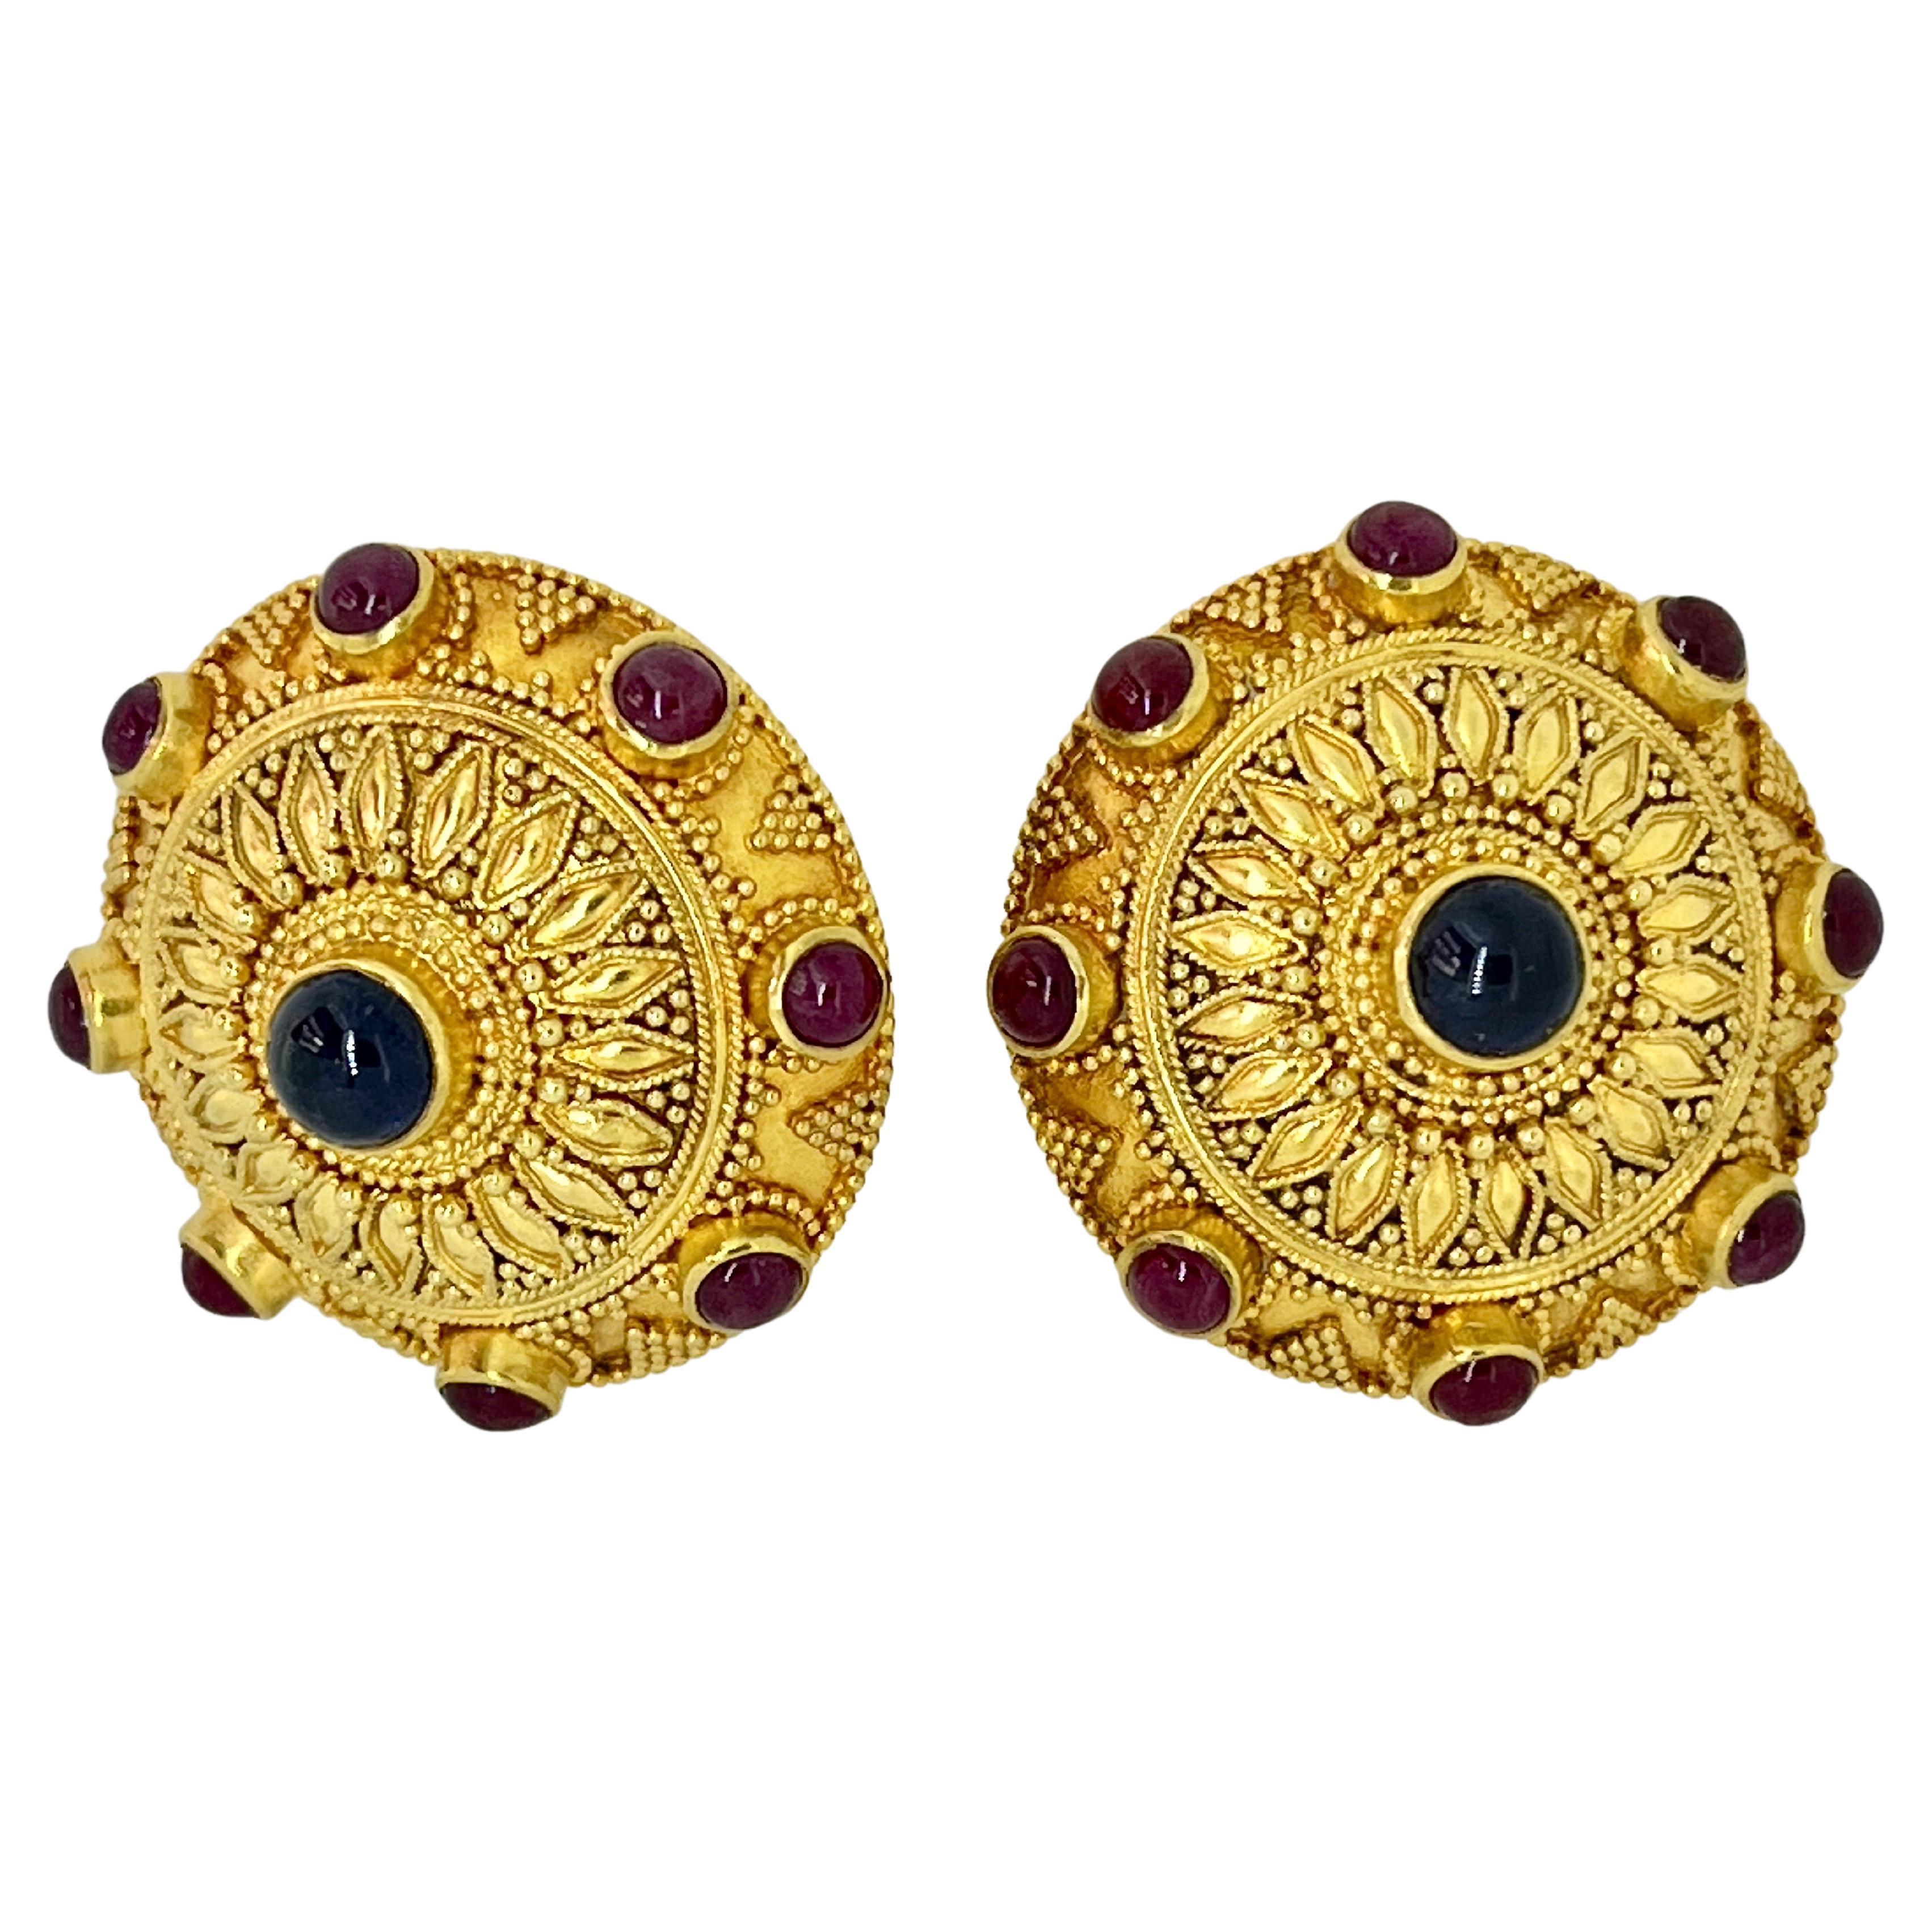 22ct Gold Byzantine Inspired Ear Clips Studded With Cabochon Sapphire and Ruby For Sale 4